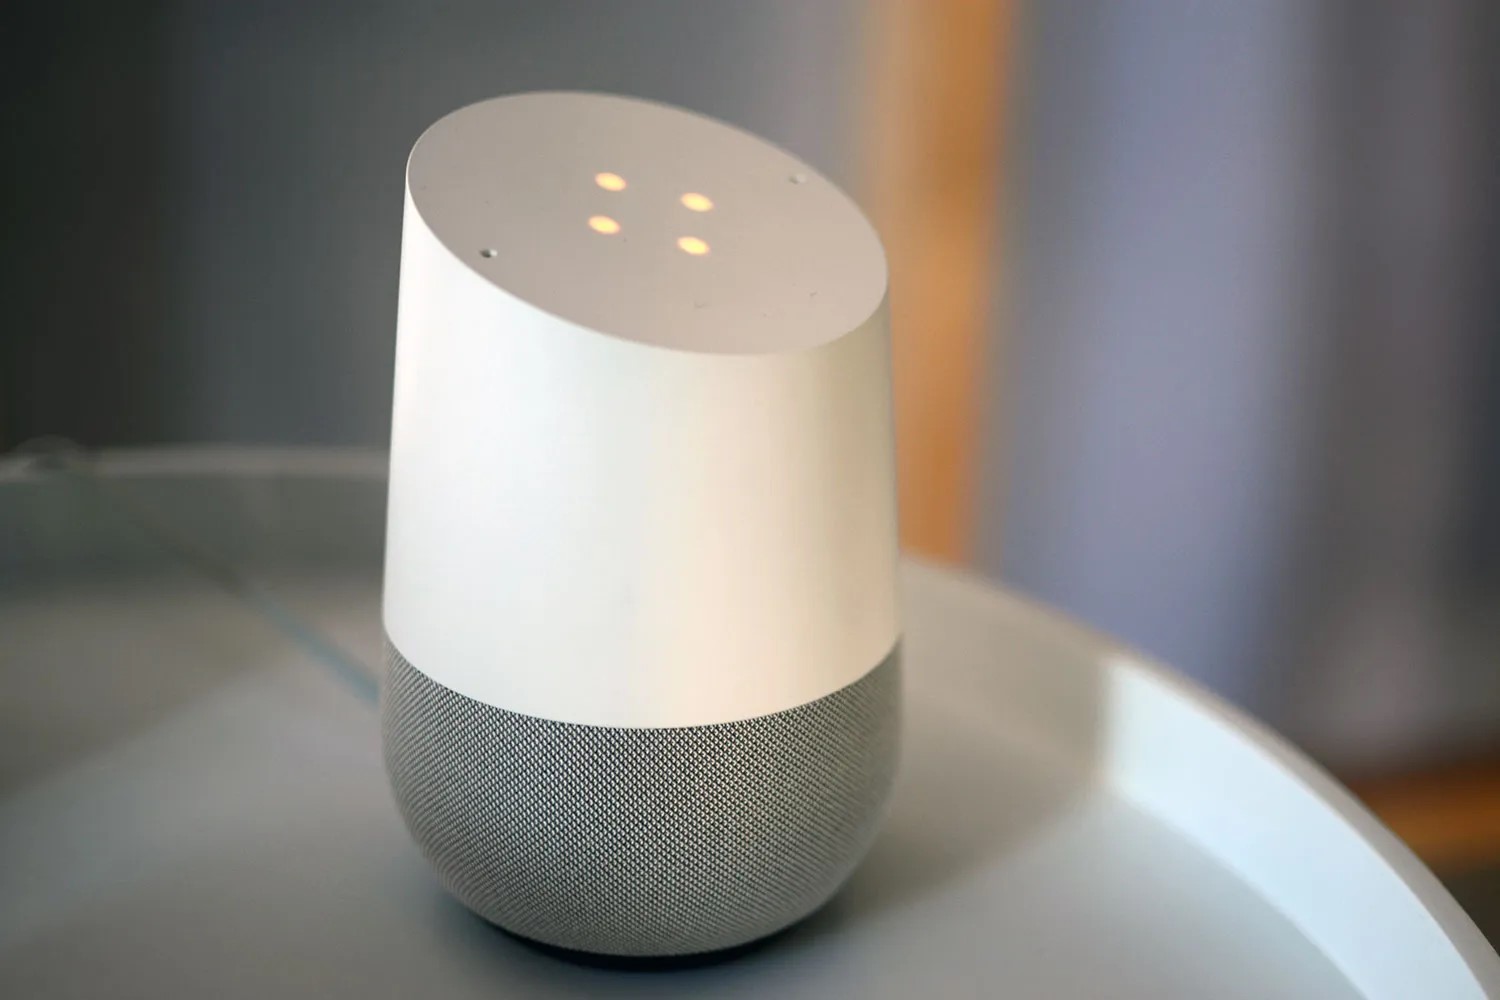 Why Is My Google Home Skipping Songs?